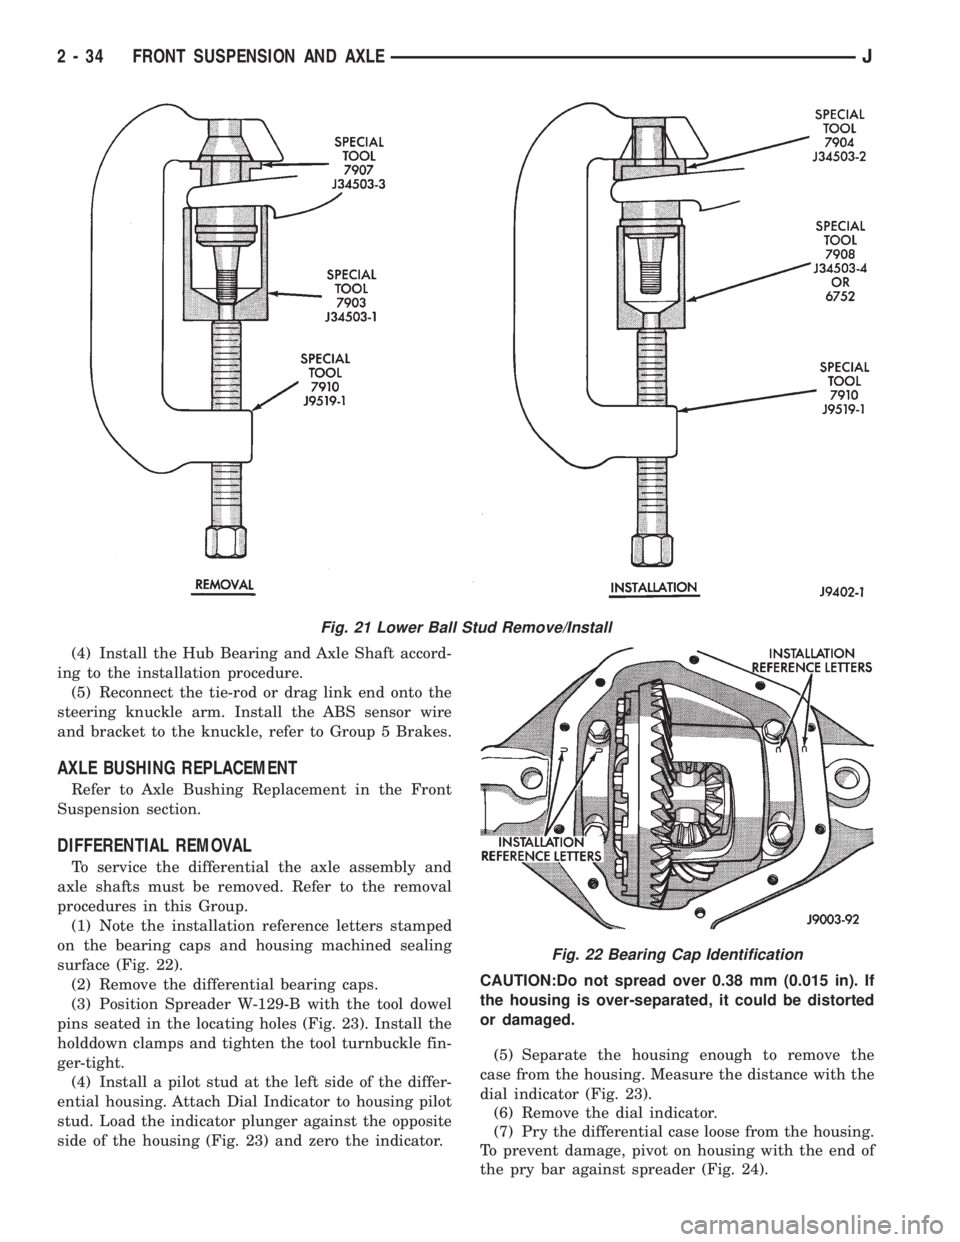 JEEP XJ 1995  Service And Repair Manual (4) Install the Hub Bearing and Axle Shaft accord-
ing to the installation procedure.
(5) Reconnect the tie-rod or drag link end onto the
steering knuckle arm. Install the ABS sensor wire
and bracket 